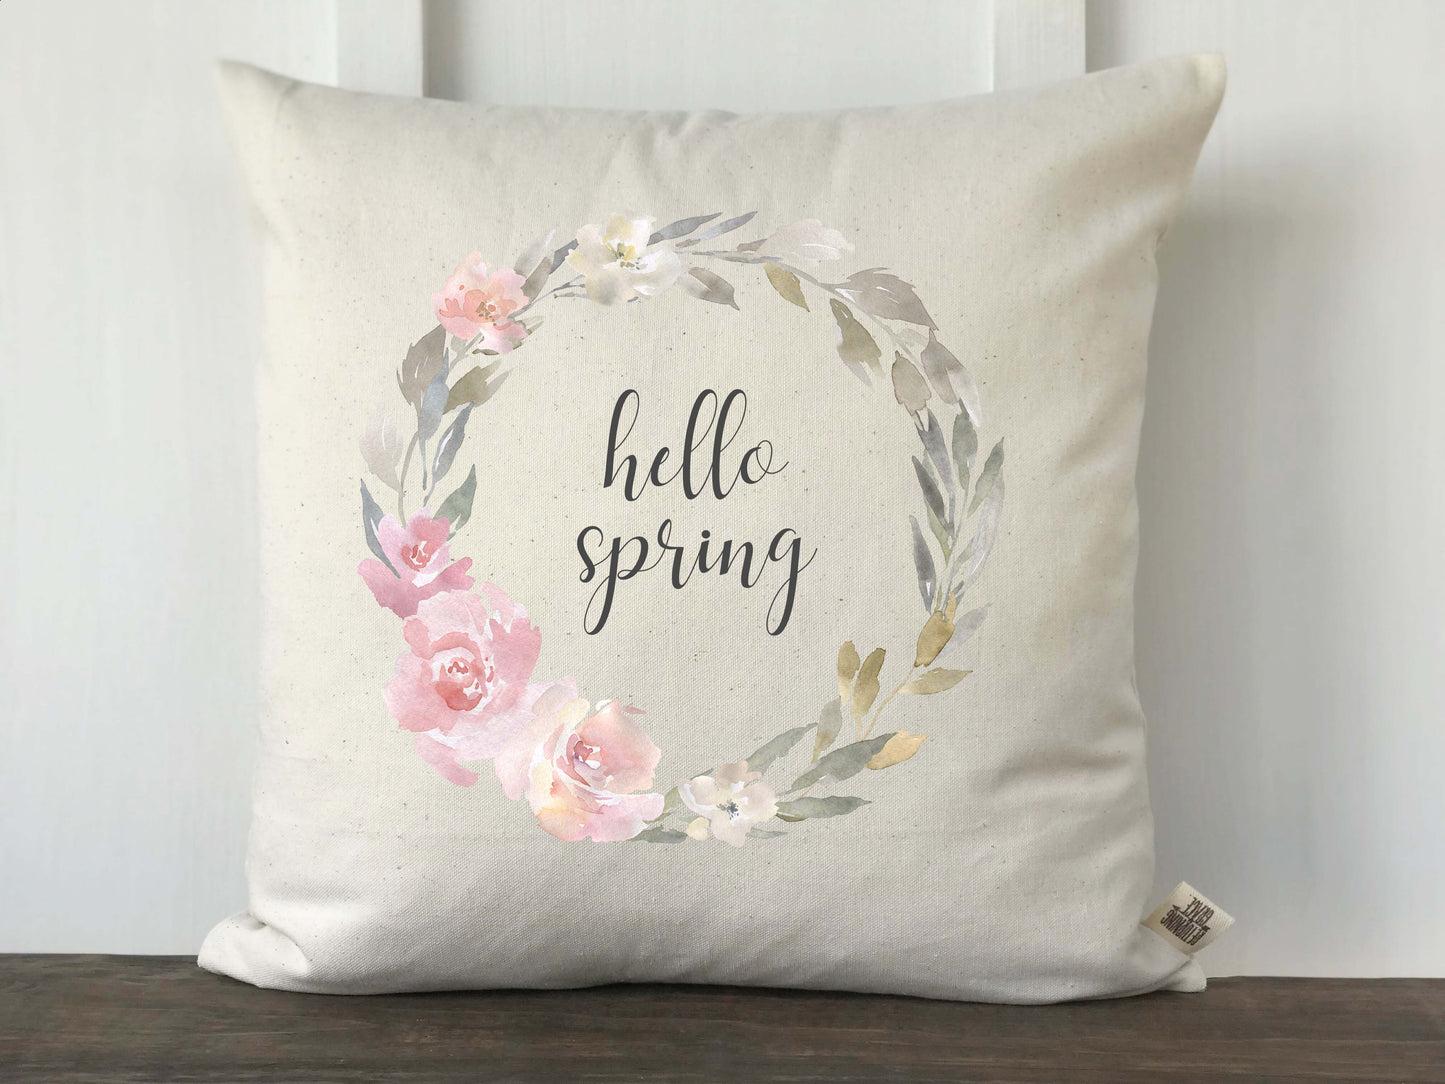 Hello Spring Pink and Gray Wreath Pillow Cover - Returning Grace Designs